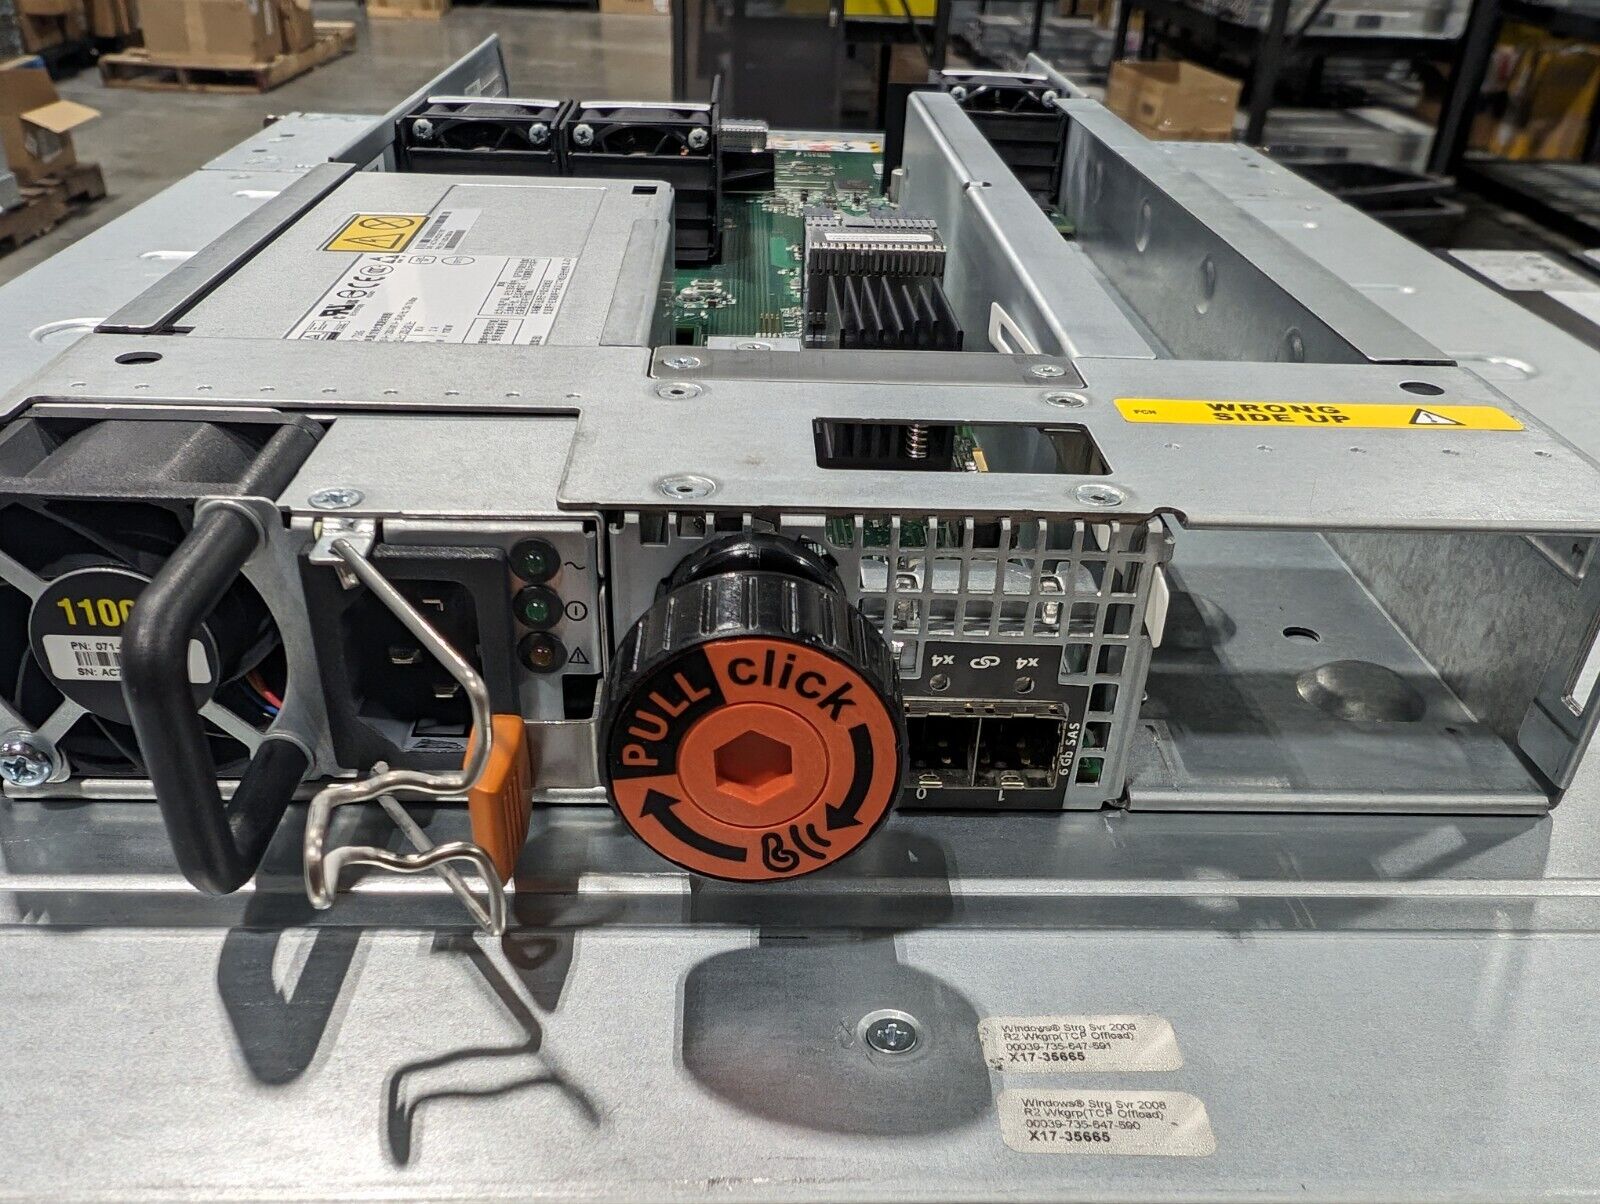 EMC 042-009-699 VNX5600 chassis with PSU